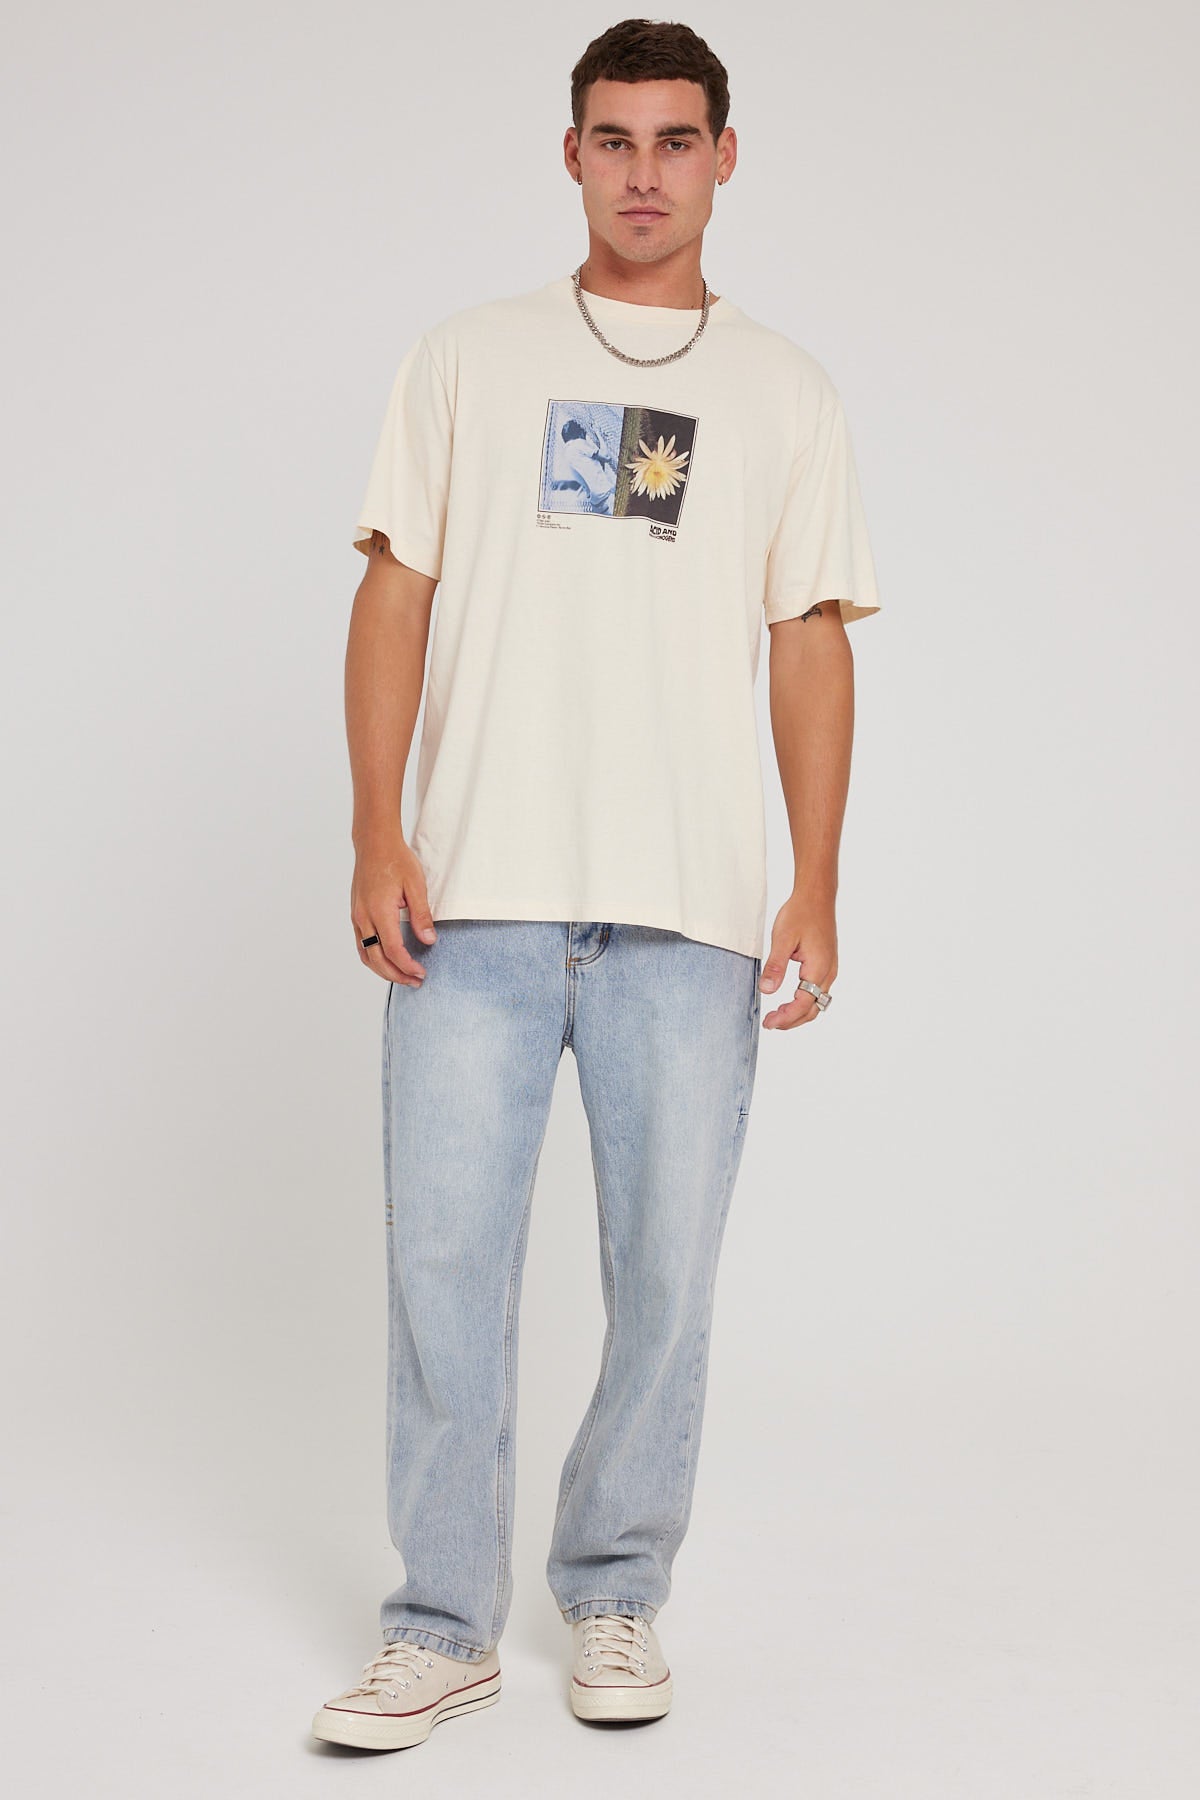 Thrills A And H Merch Fit Tee Heritage White – Universal Store